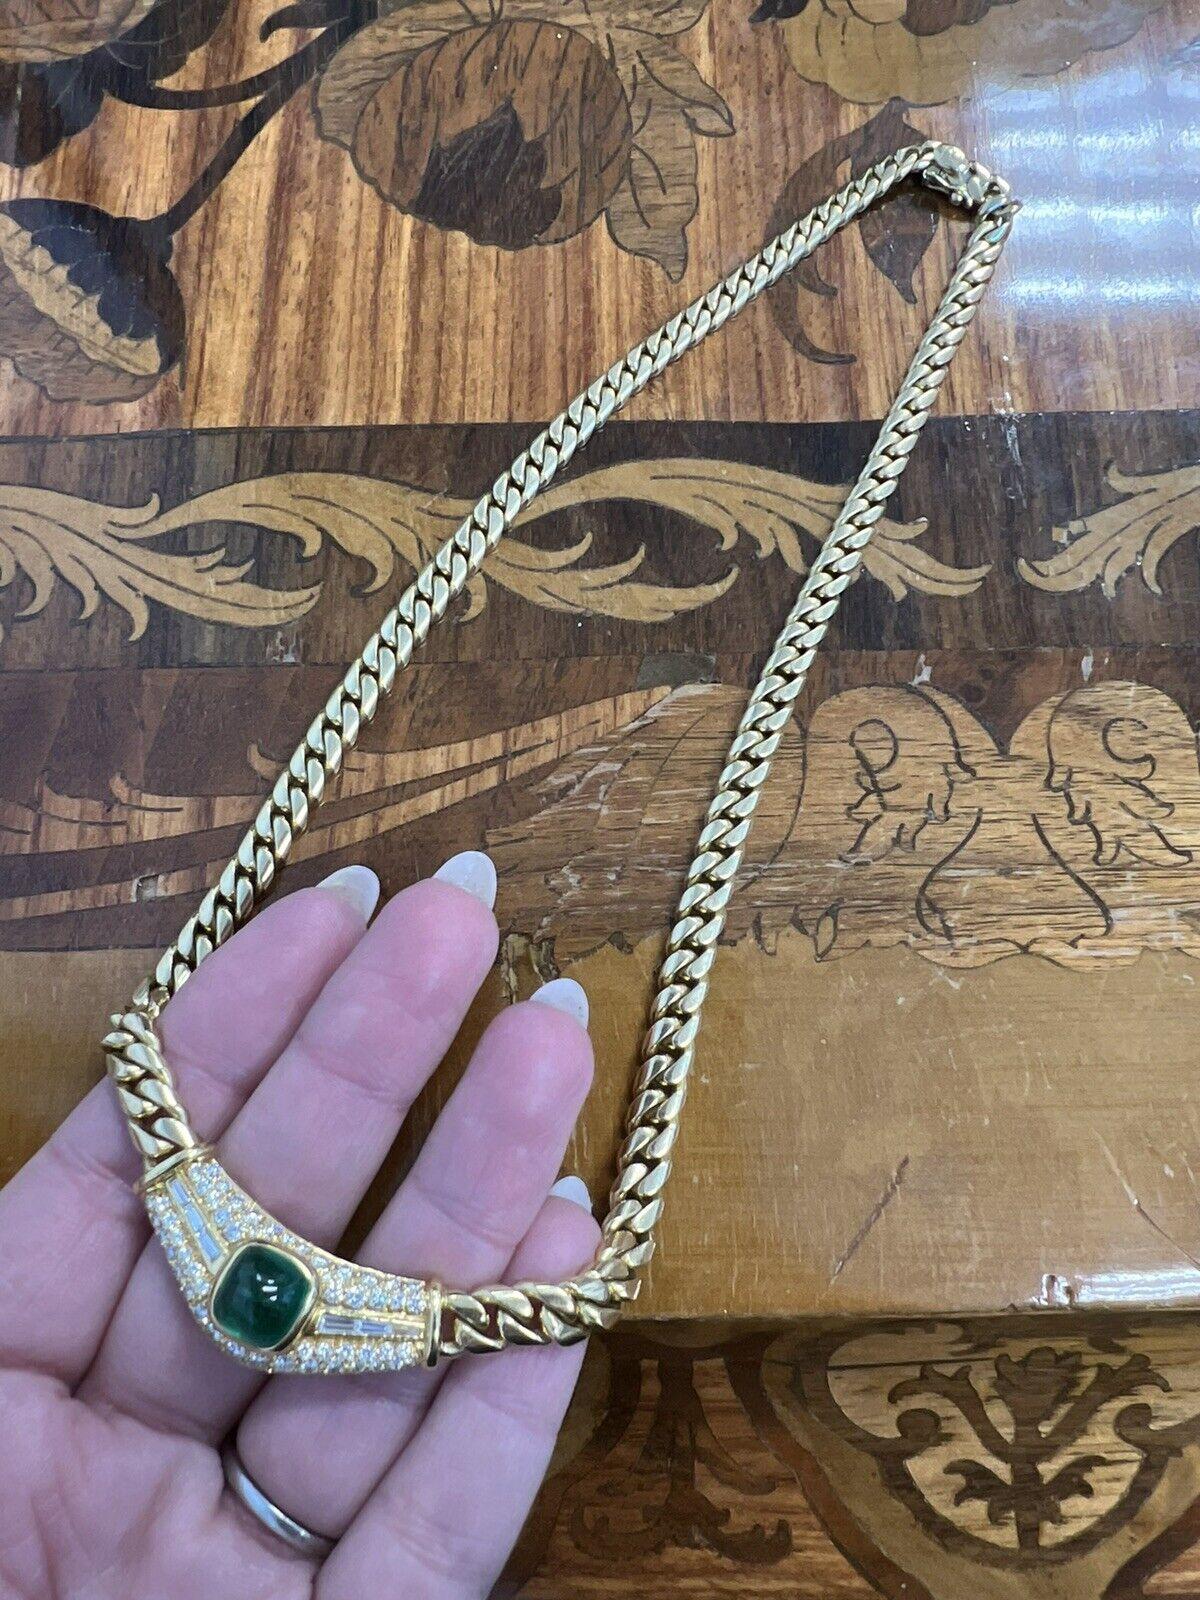 Bvlgari Italy 18k Yellow Gold, Diamond & 4.35 Carat Sugarloaf Emerald Necklace Circa 1980s Vintage

Here is your chance to purchase a beautiful and highly collectible designer necklace.      

The length is 16 inches across.  The necklace is marked